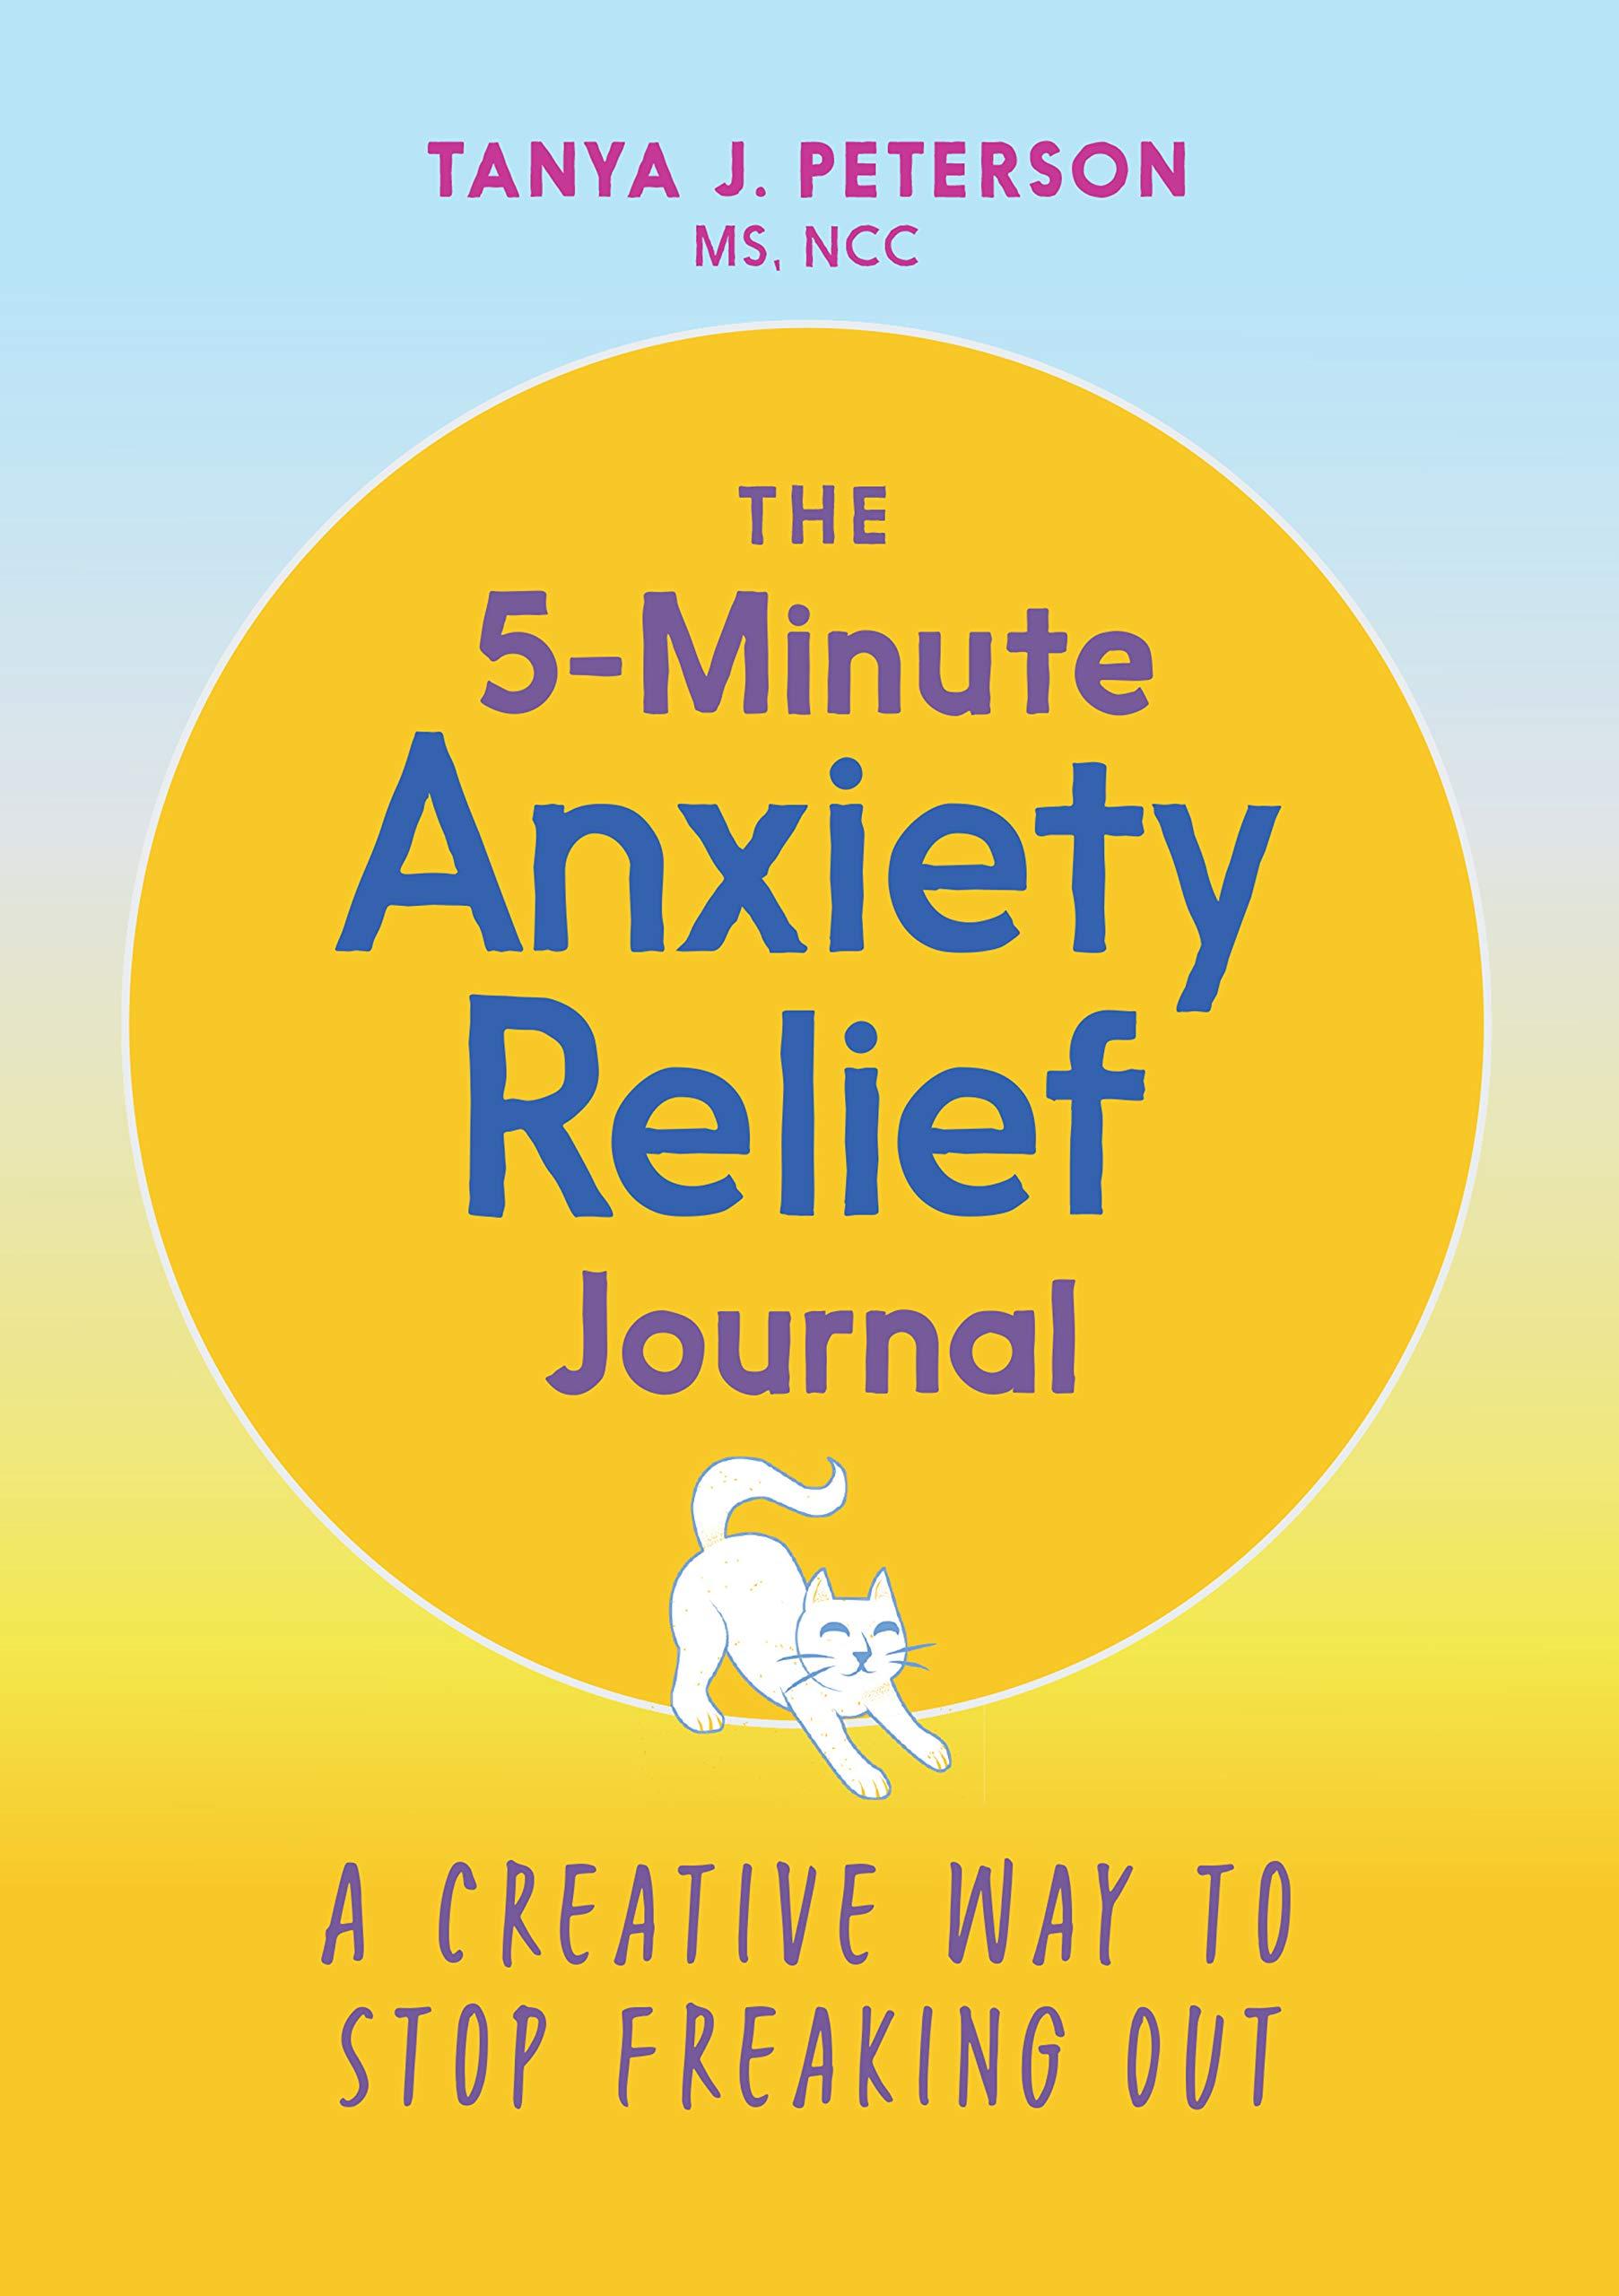 5-Minute Anxiety Relief Journal